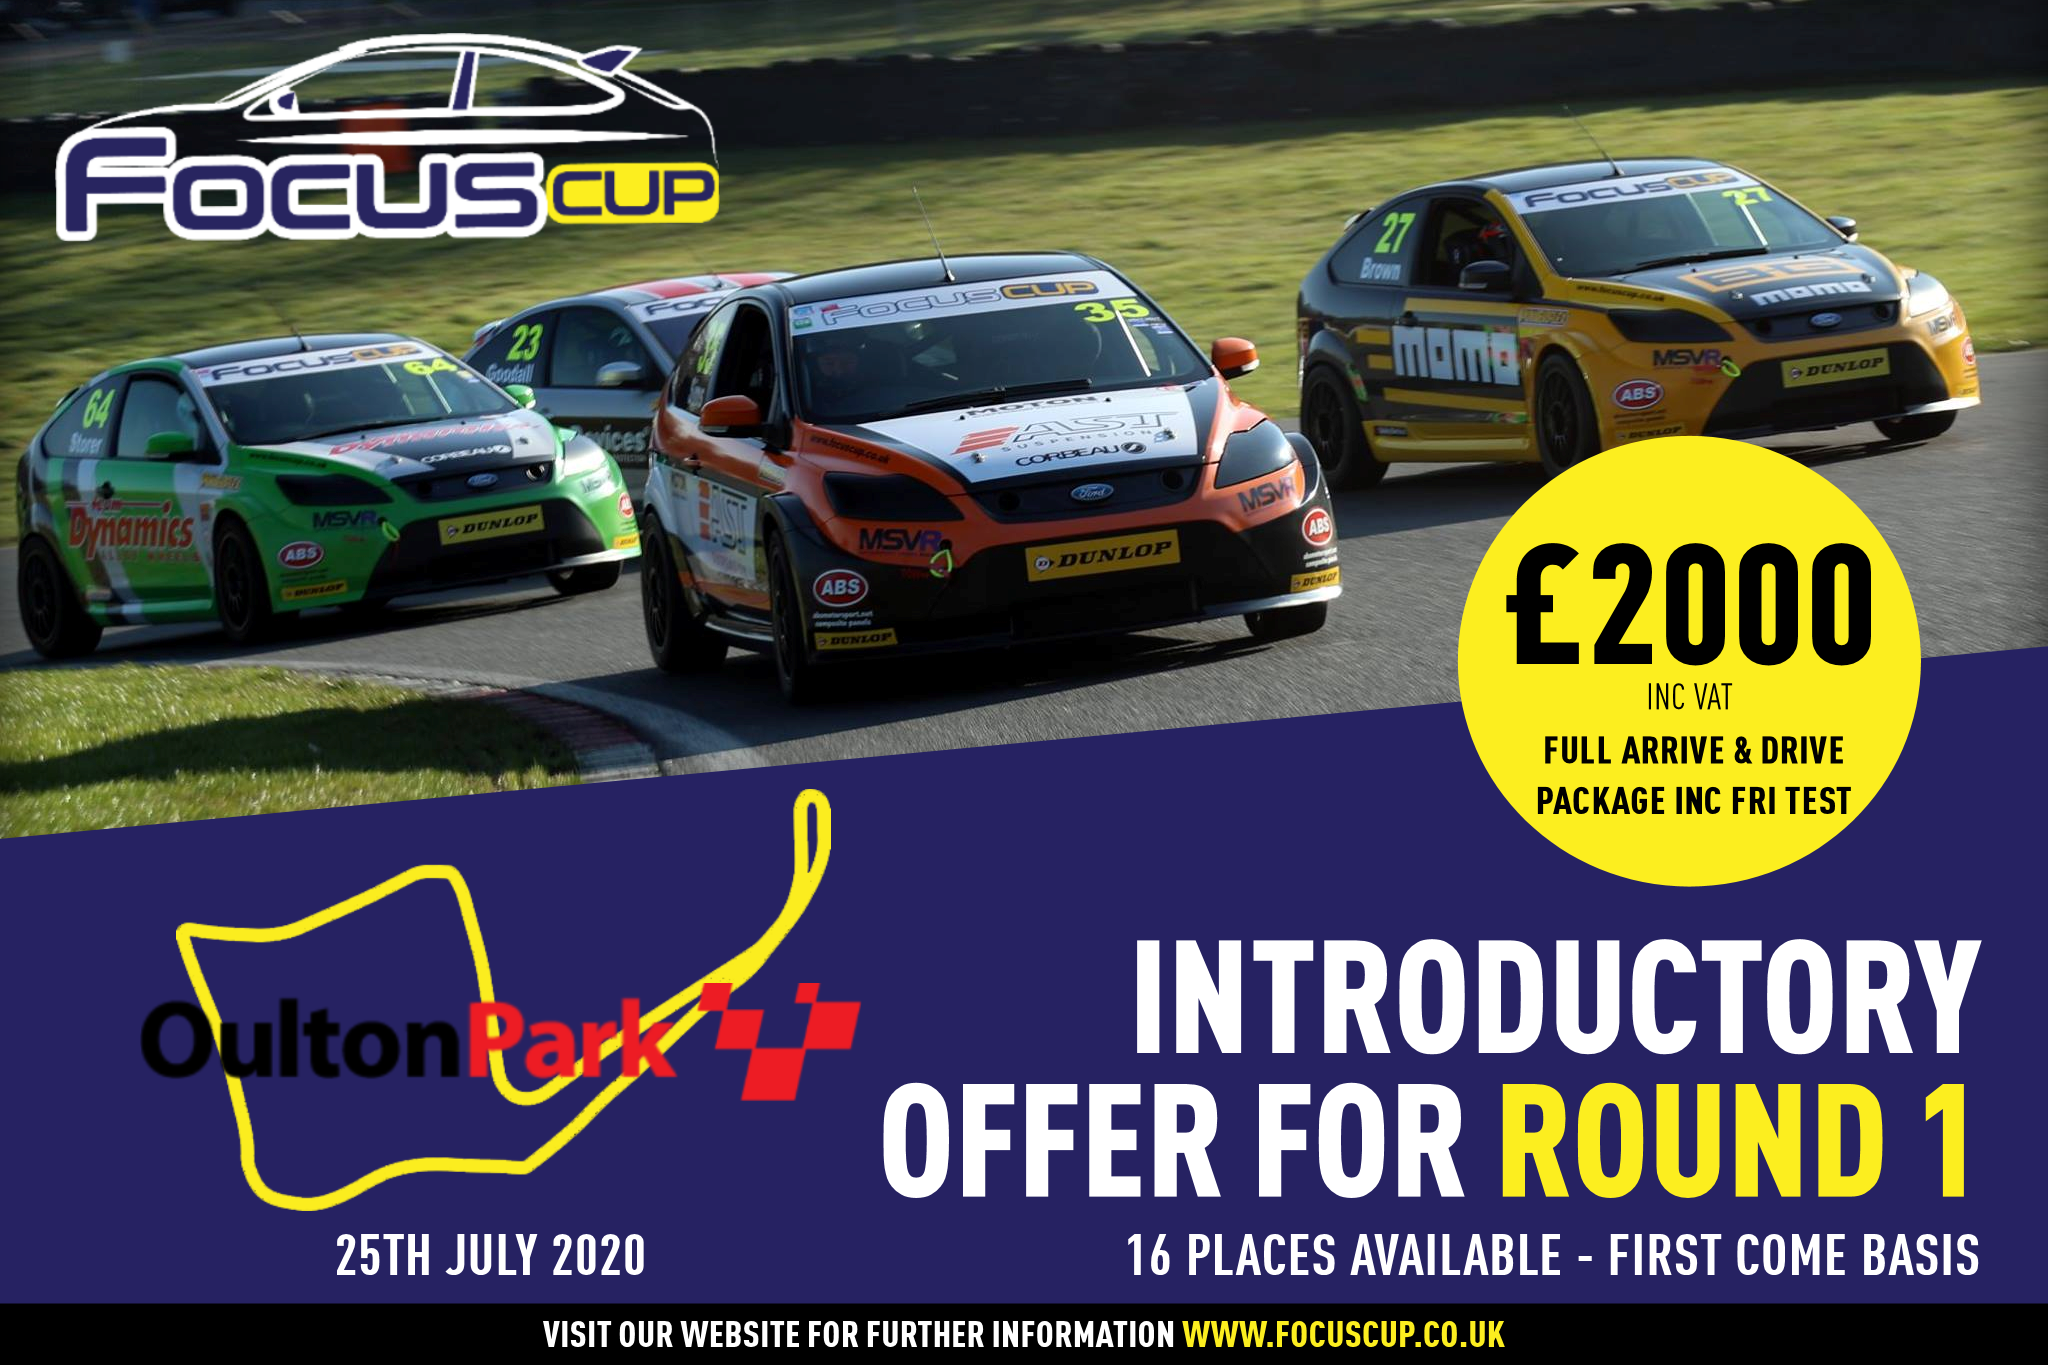 Introductory Offer For Round 1